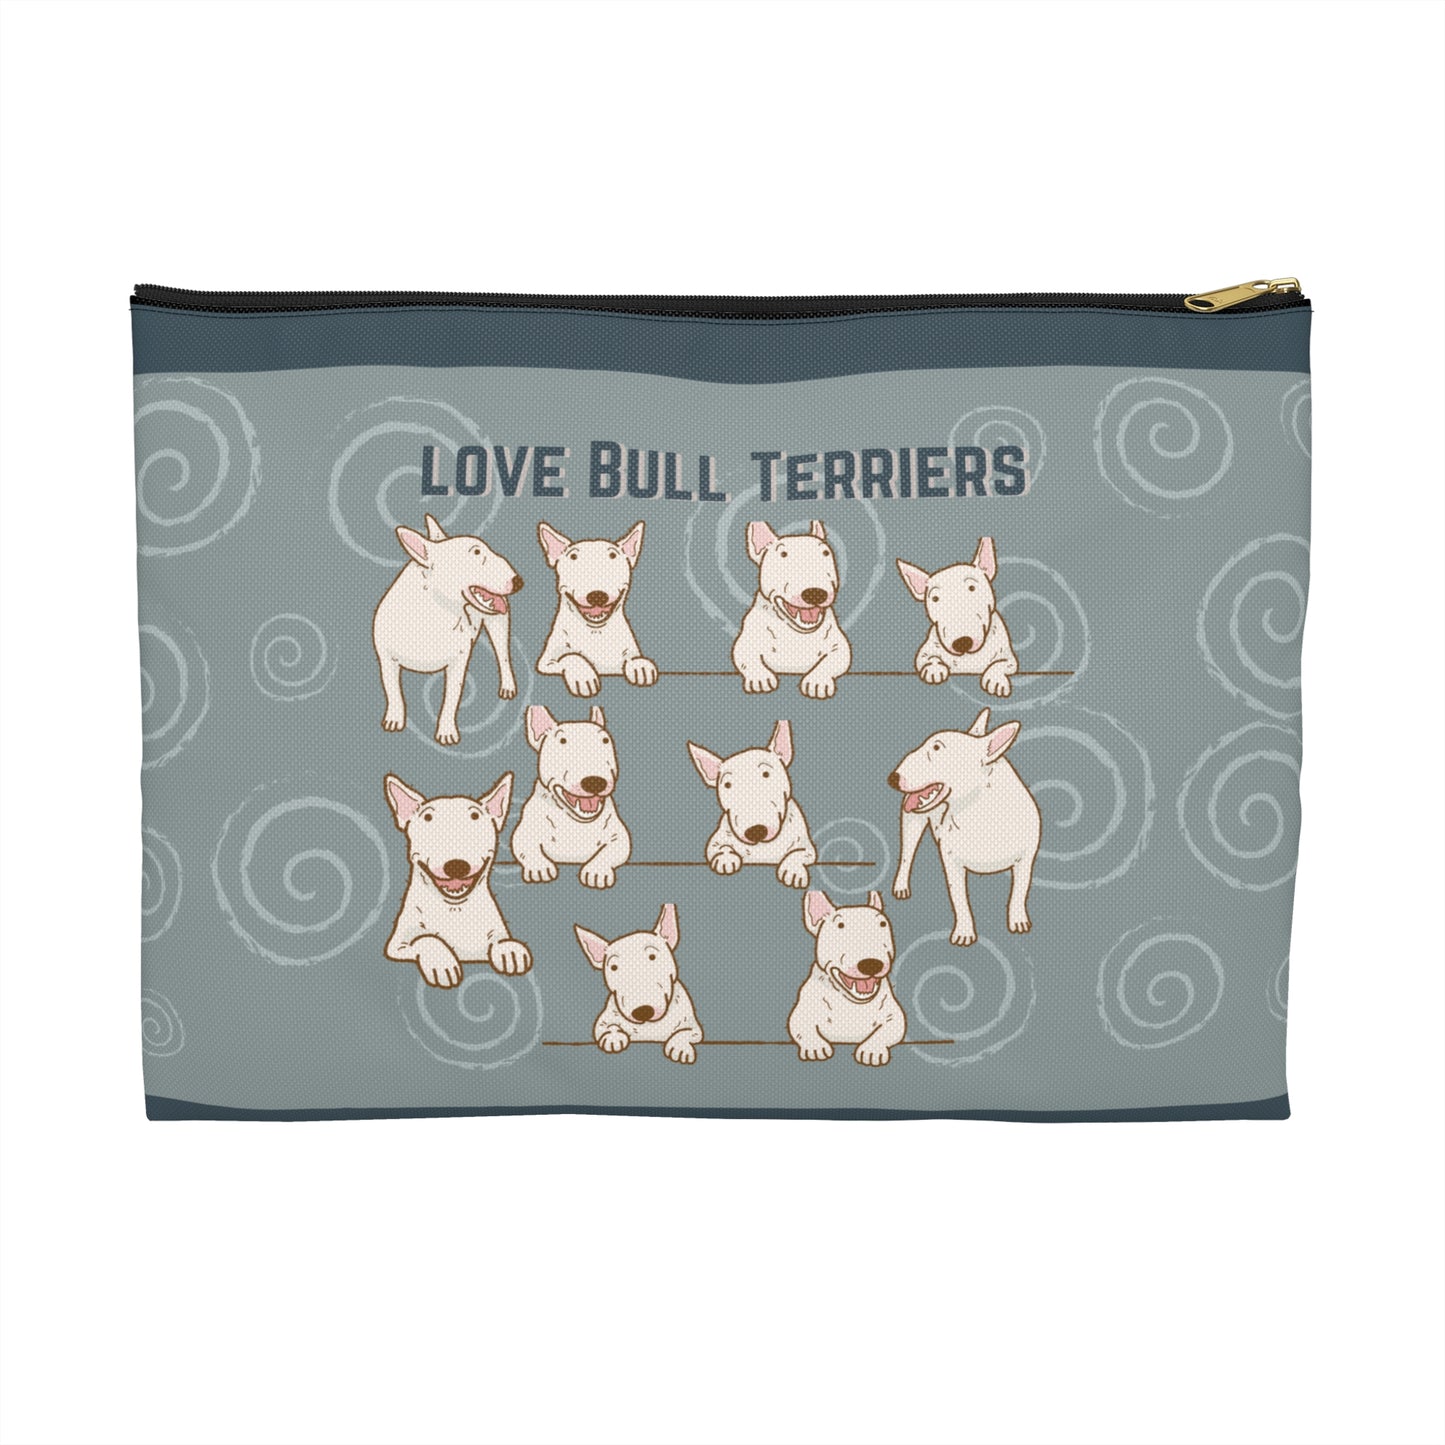 Bull Terrier Accessory Travel Pouch, Bully All-Purpose Bag